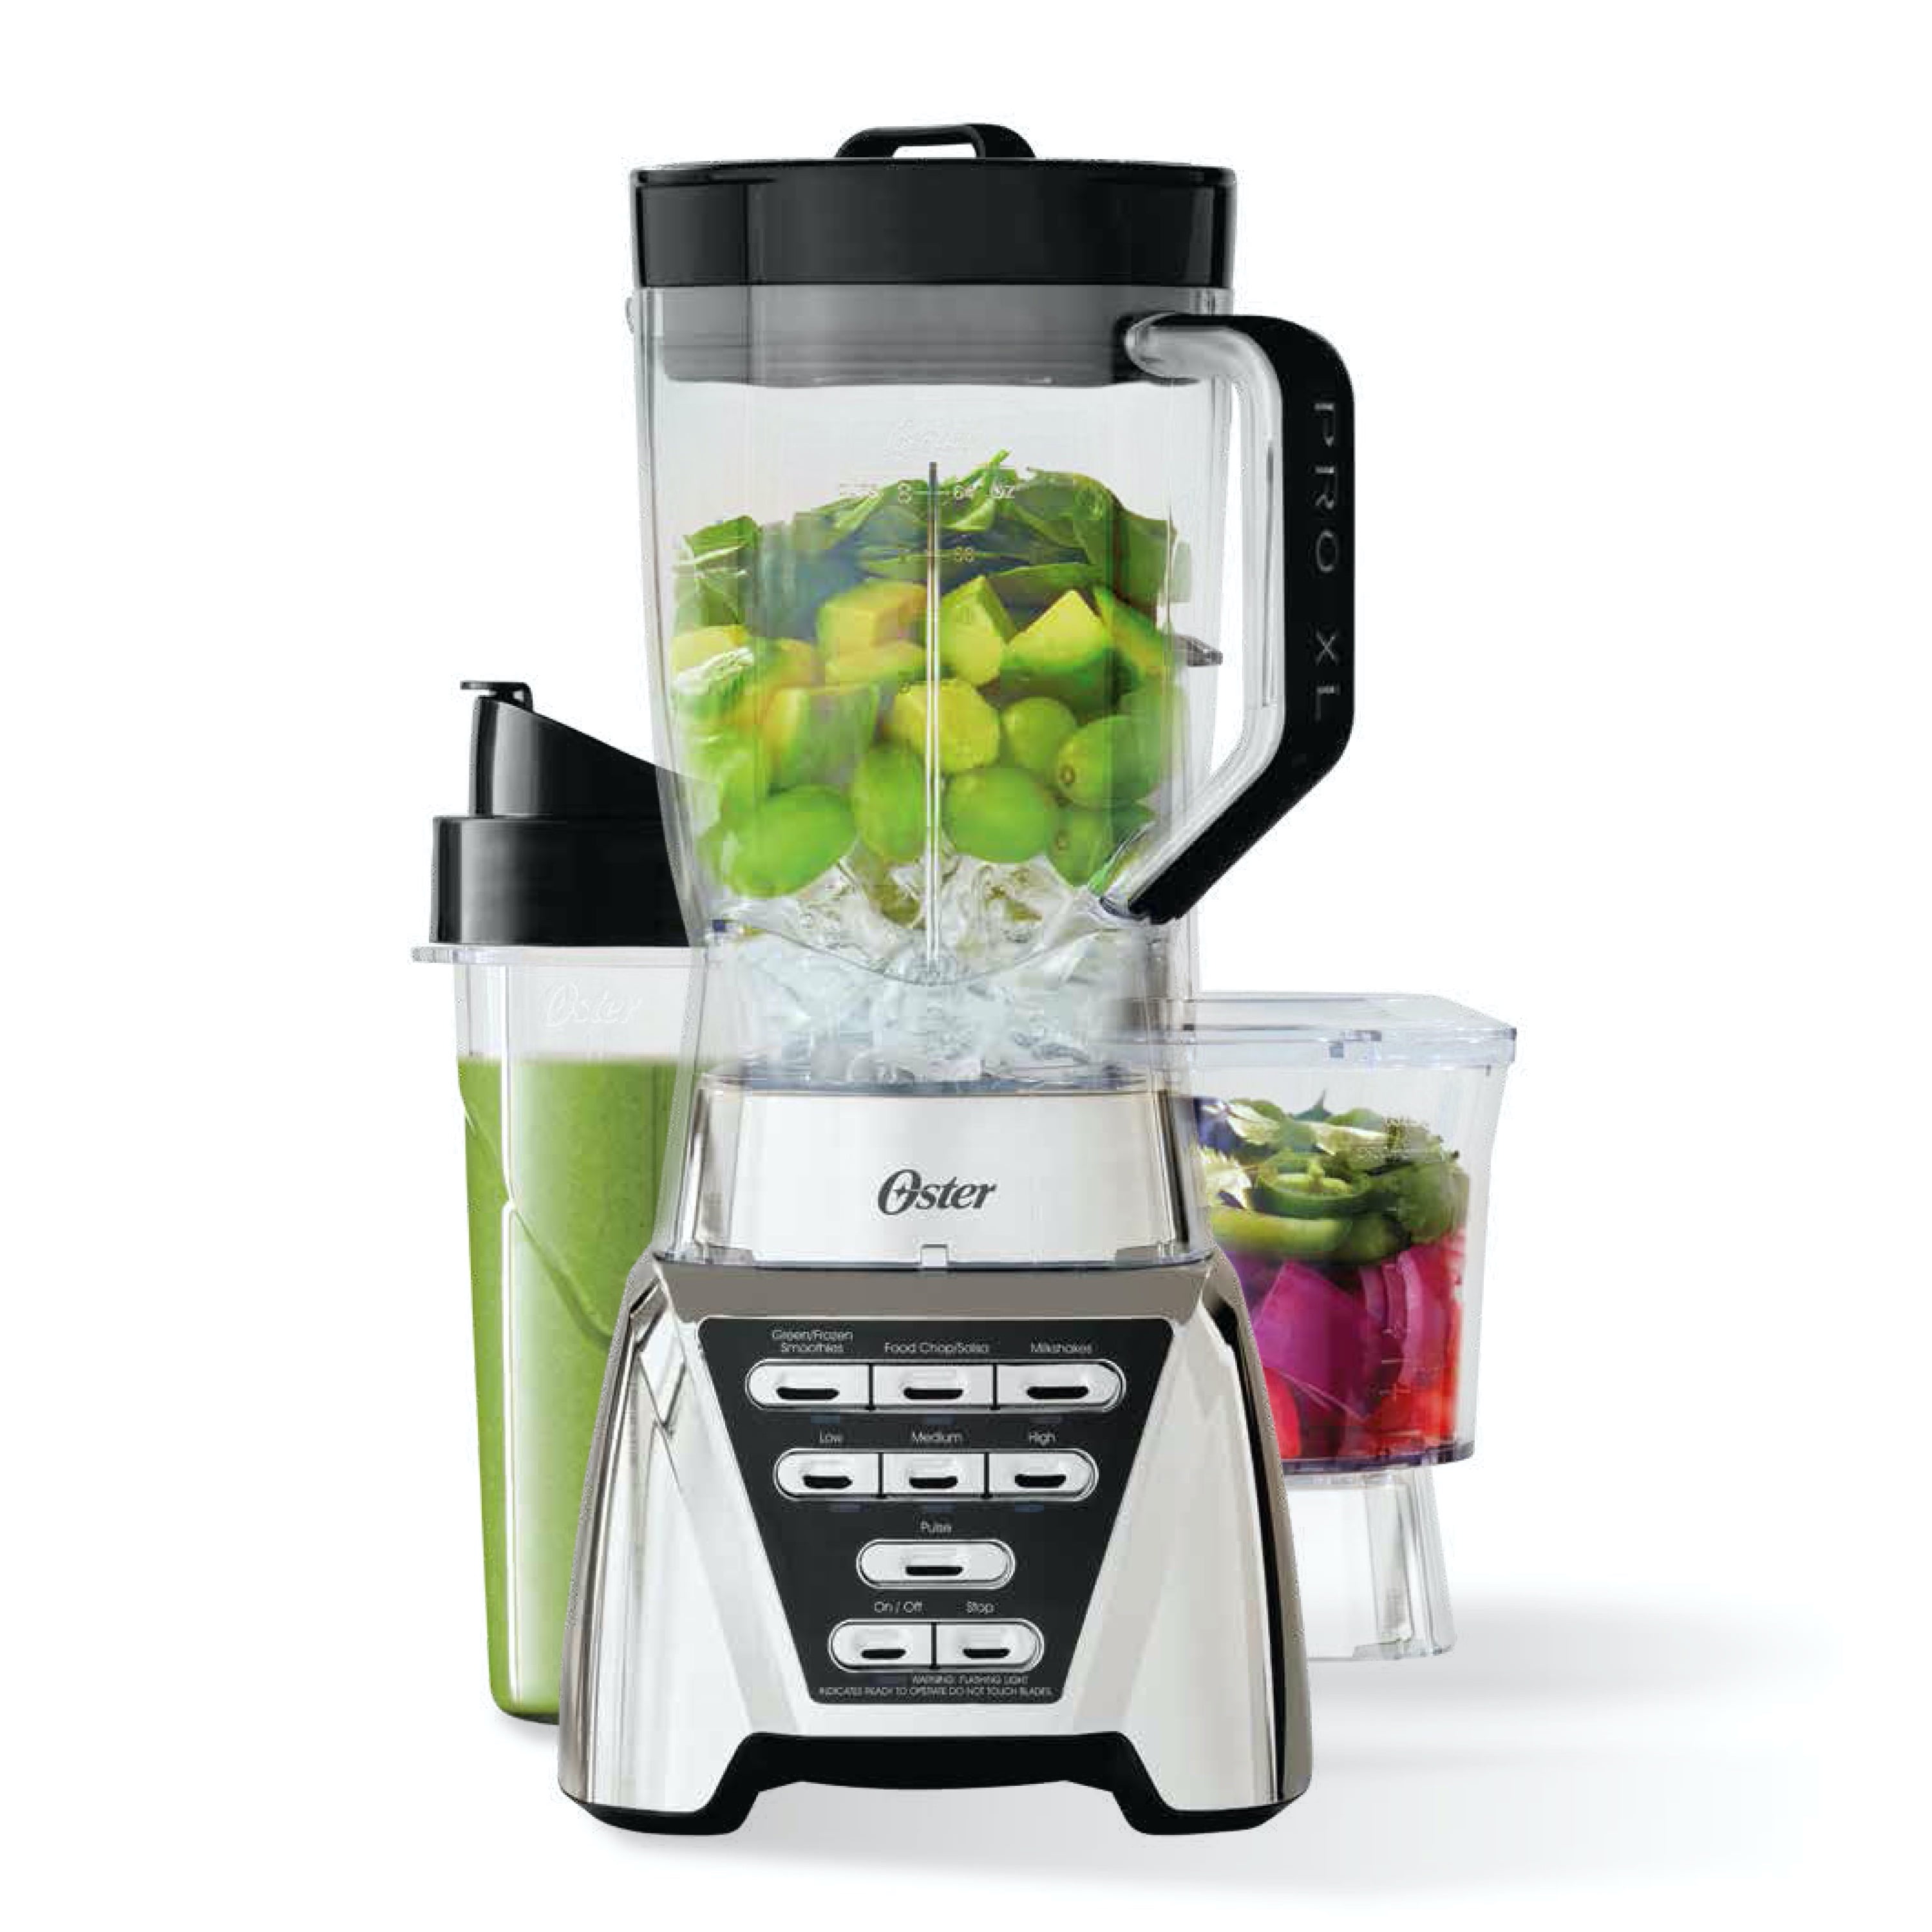 Oster 3-in-1 Blender Processor System with 1200-Watt and 5-Cup Capacity -